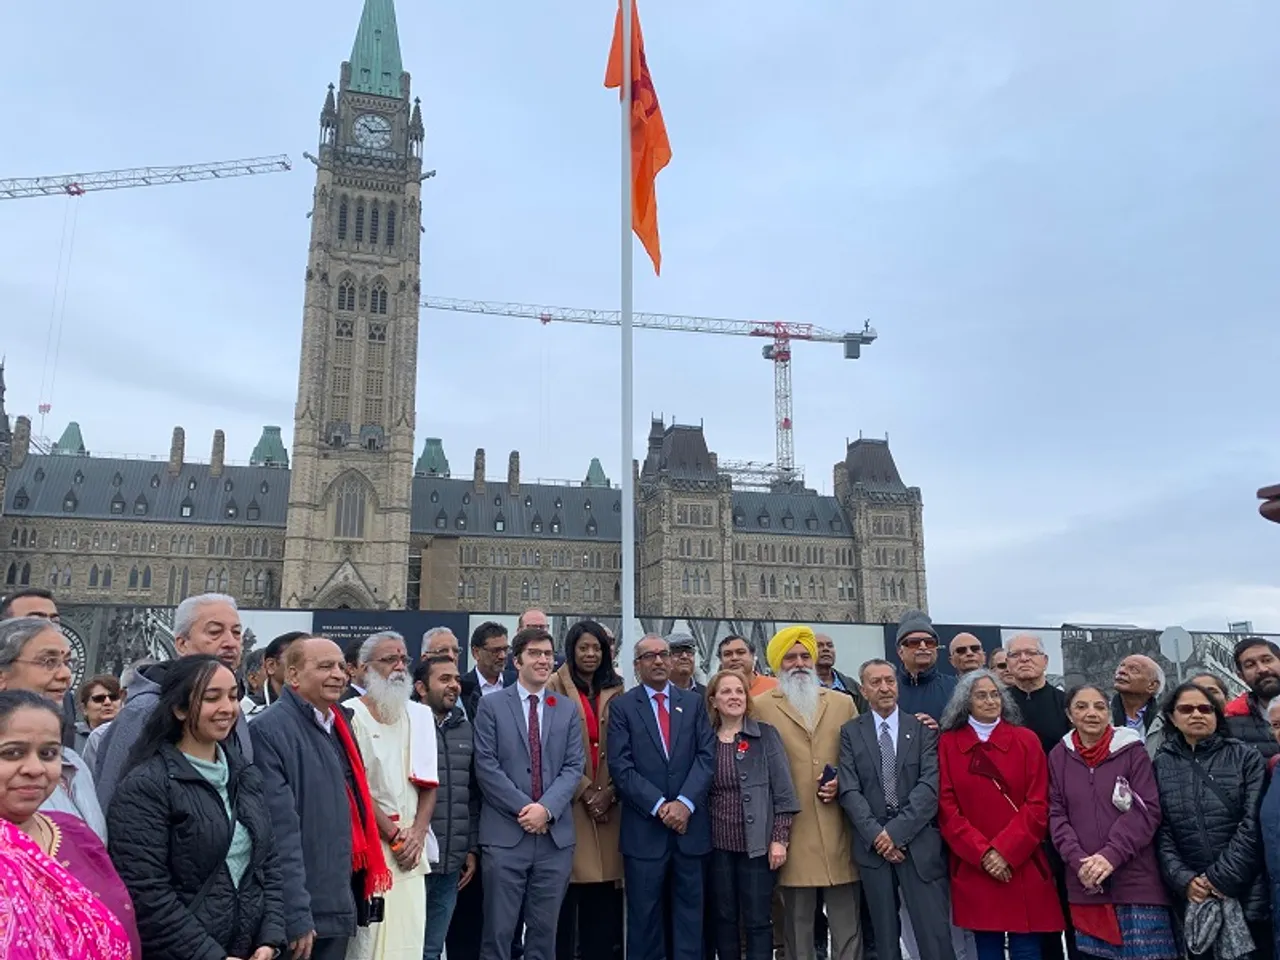 Canada to celebrate November as official Hindu Heritage Month